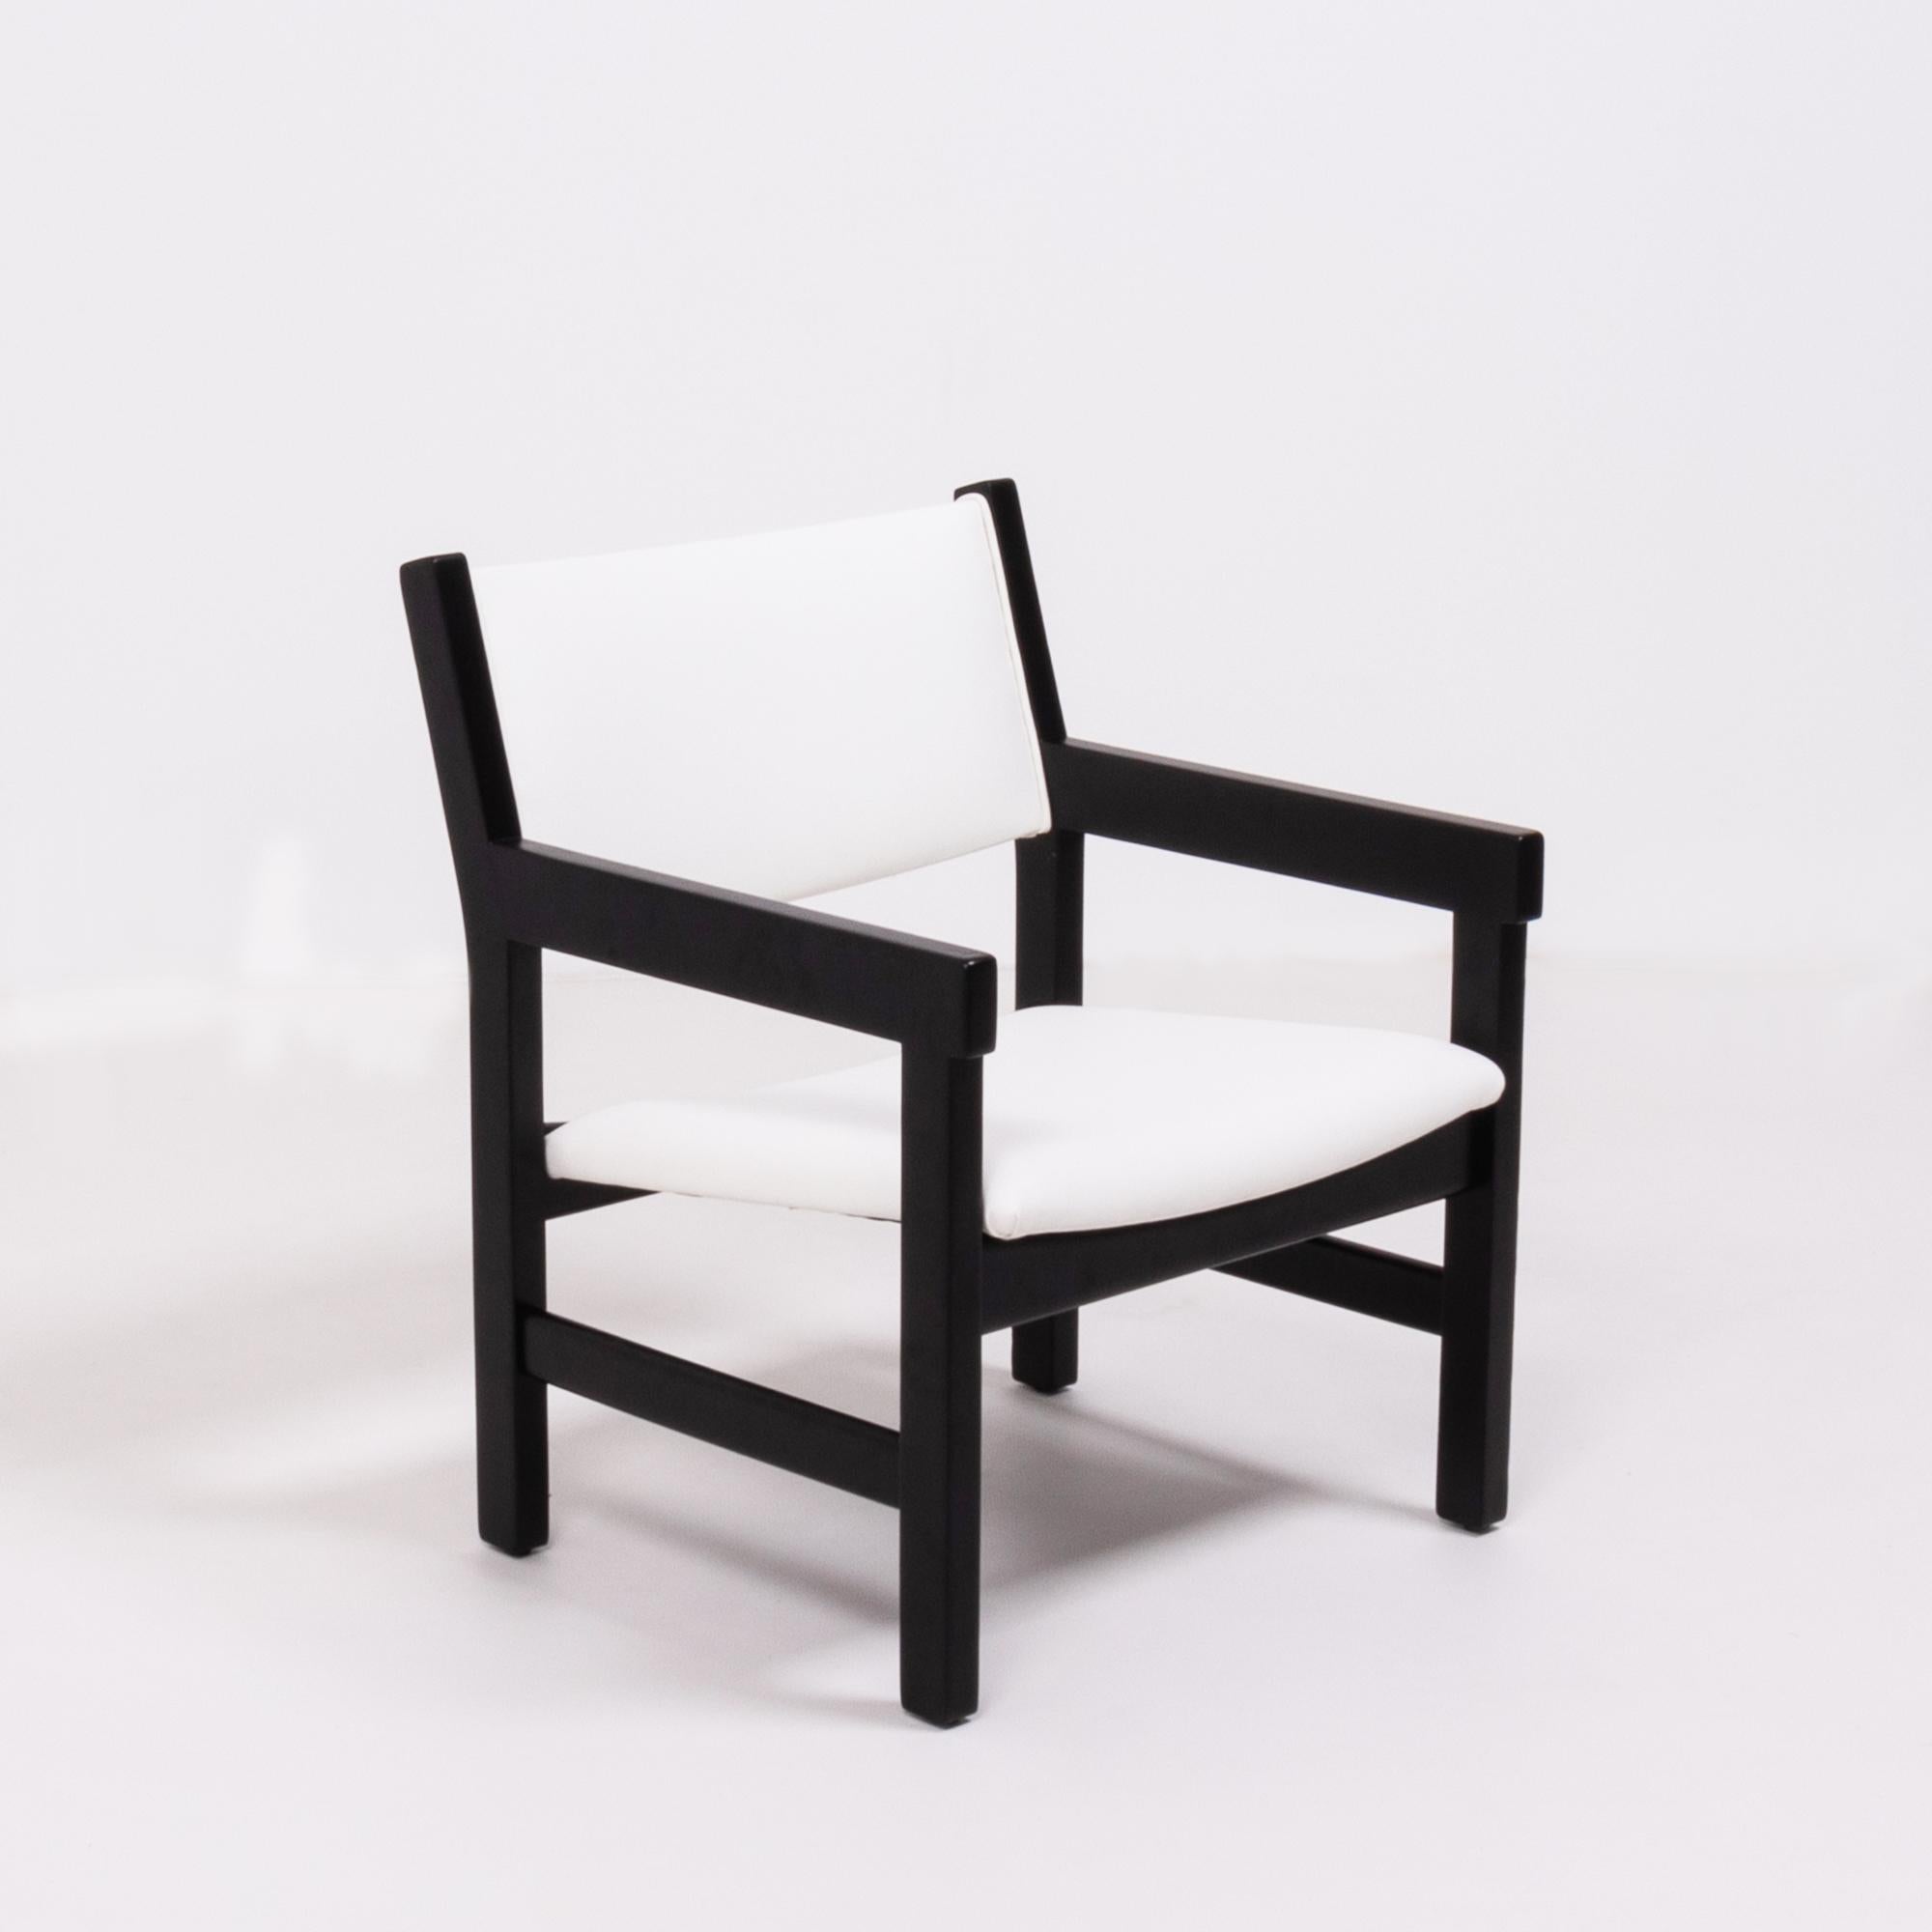 Late 20th Century Midcentury White GE 151 Dining Chairs by Hans J. Wegner for GETAMA, Set of 6